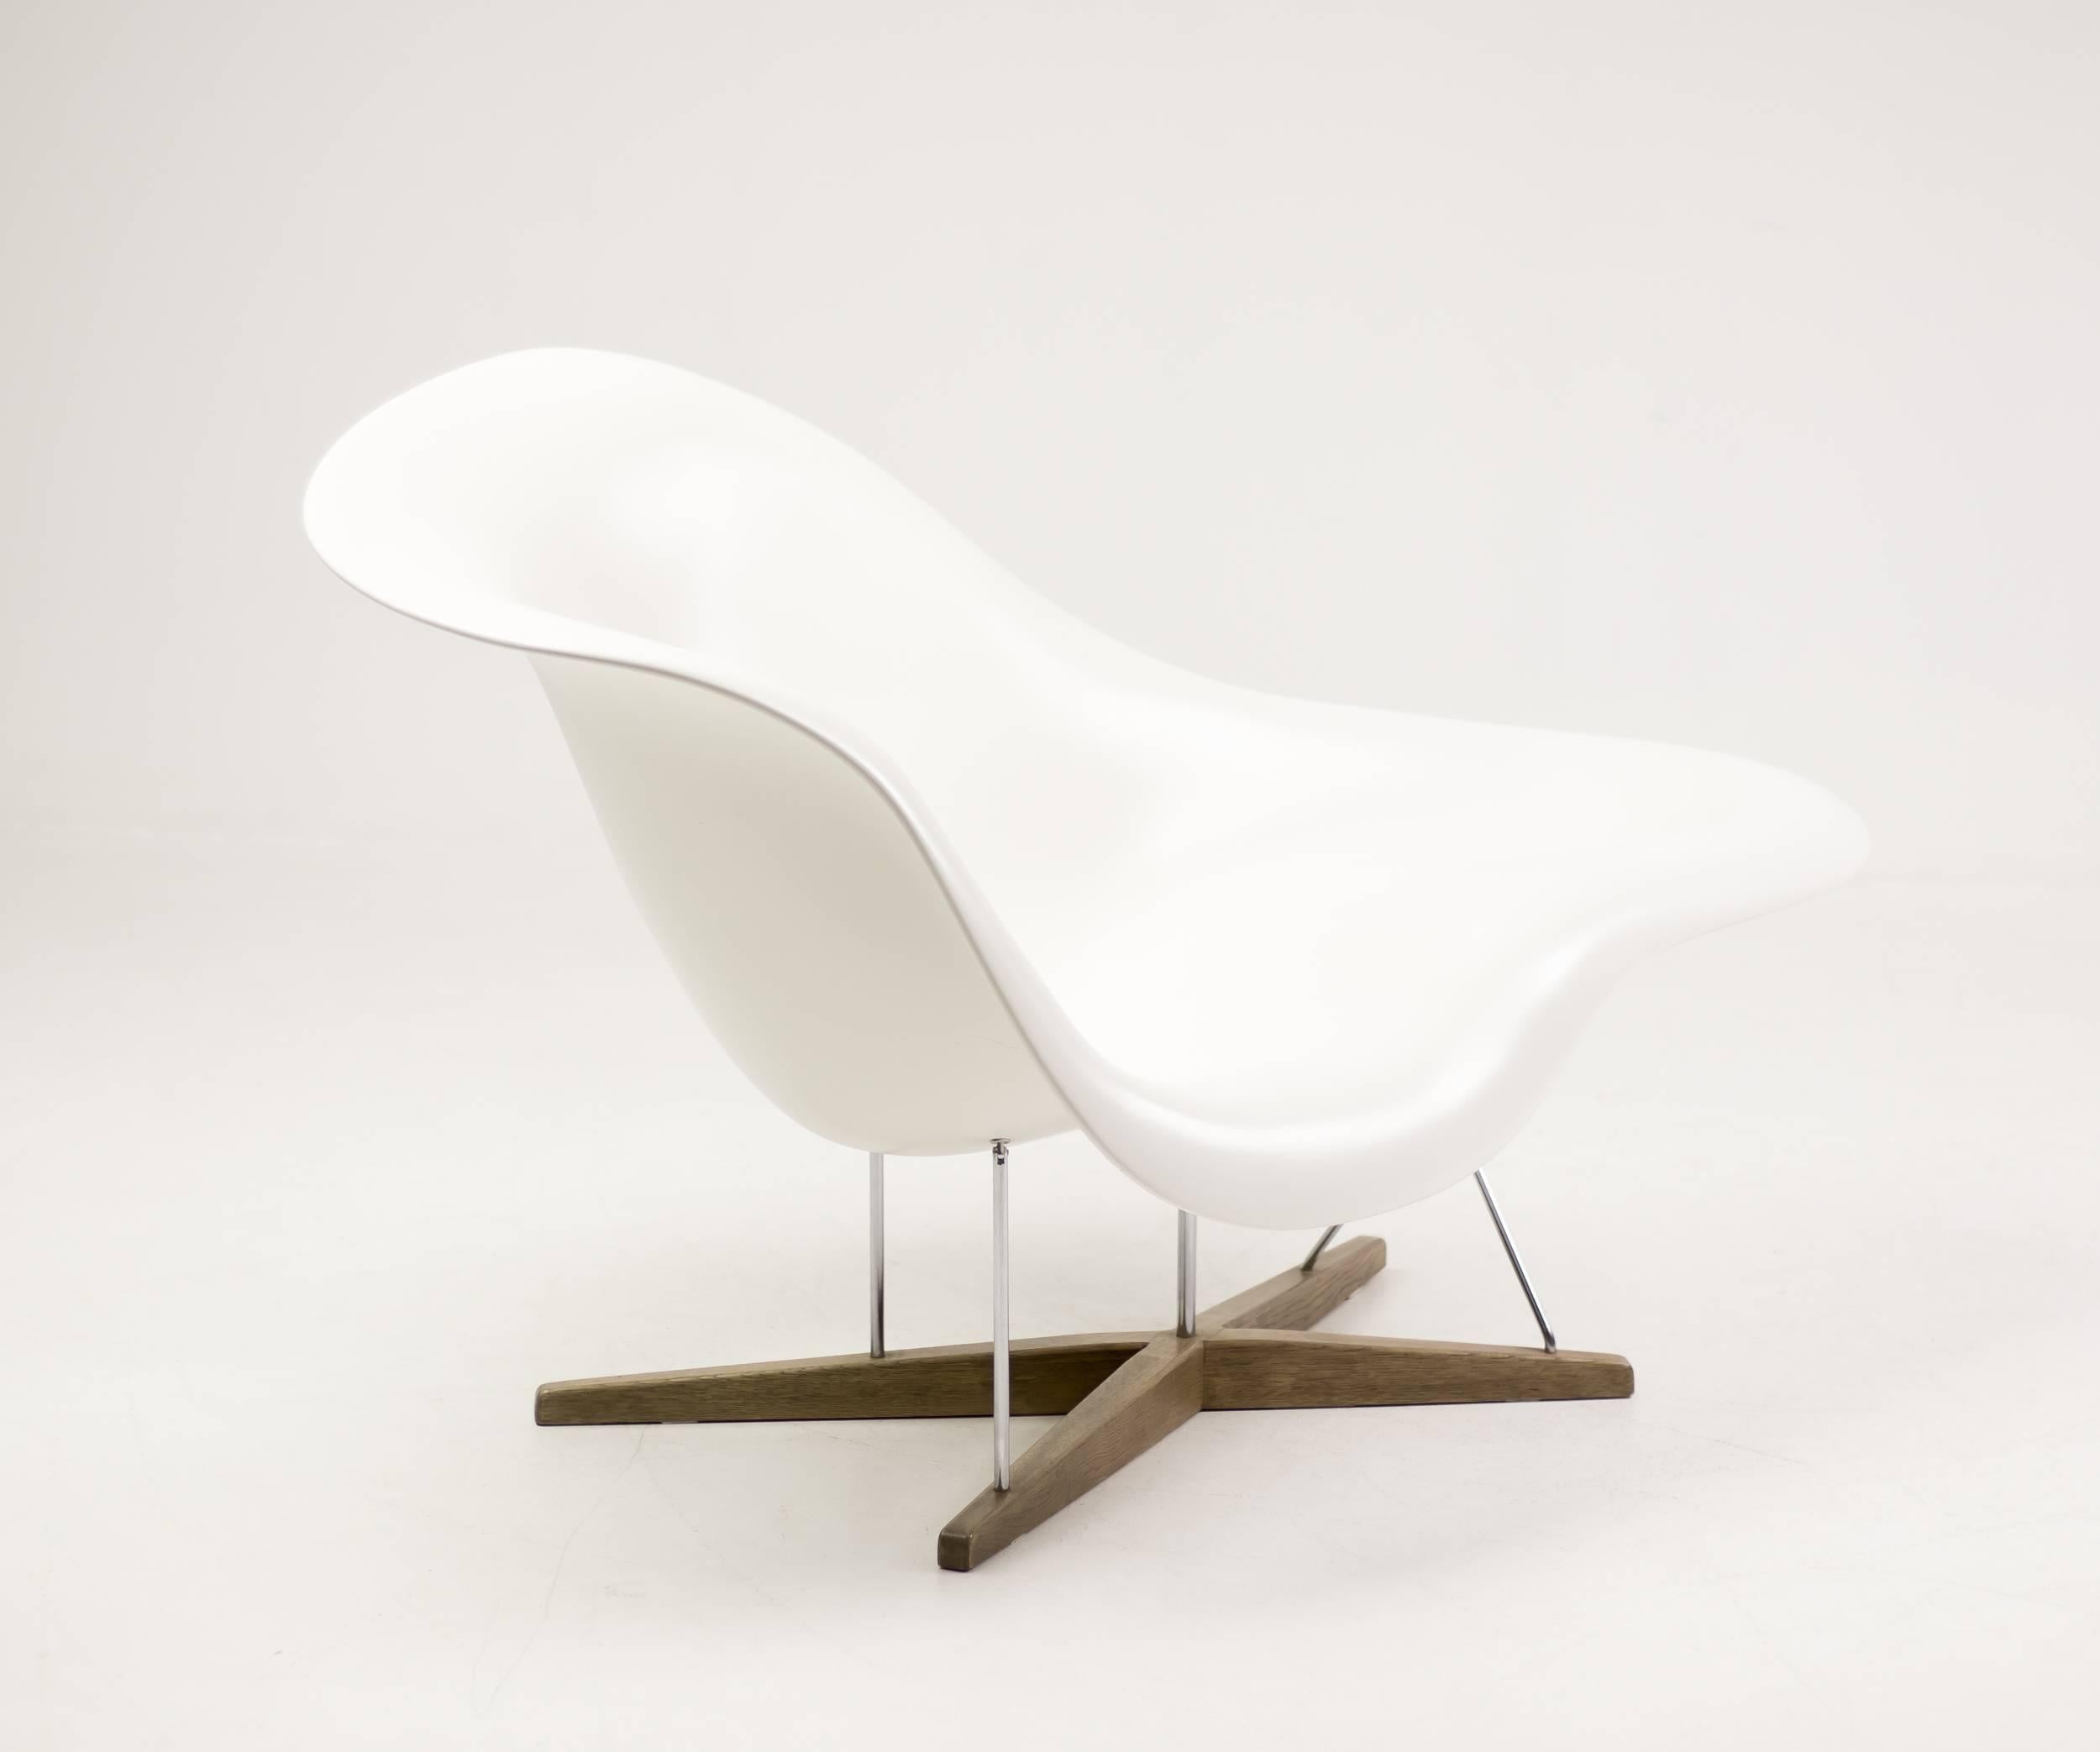 Charles and Ray Eames designed La Chaise in 1948 for a Museum of Modern Art competition. But it is only since 1991 that Vitra has been manufacturing small quantities of the design in serial production. La Chaise is suitable for both sitting and